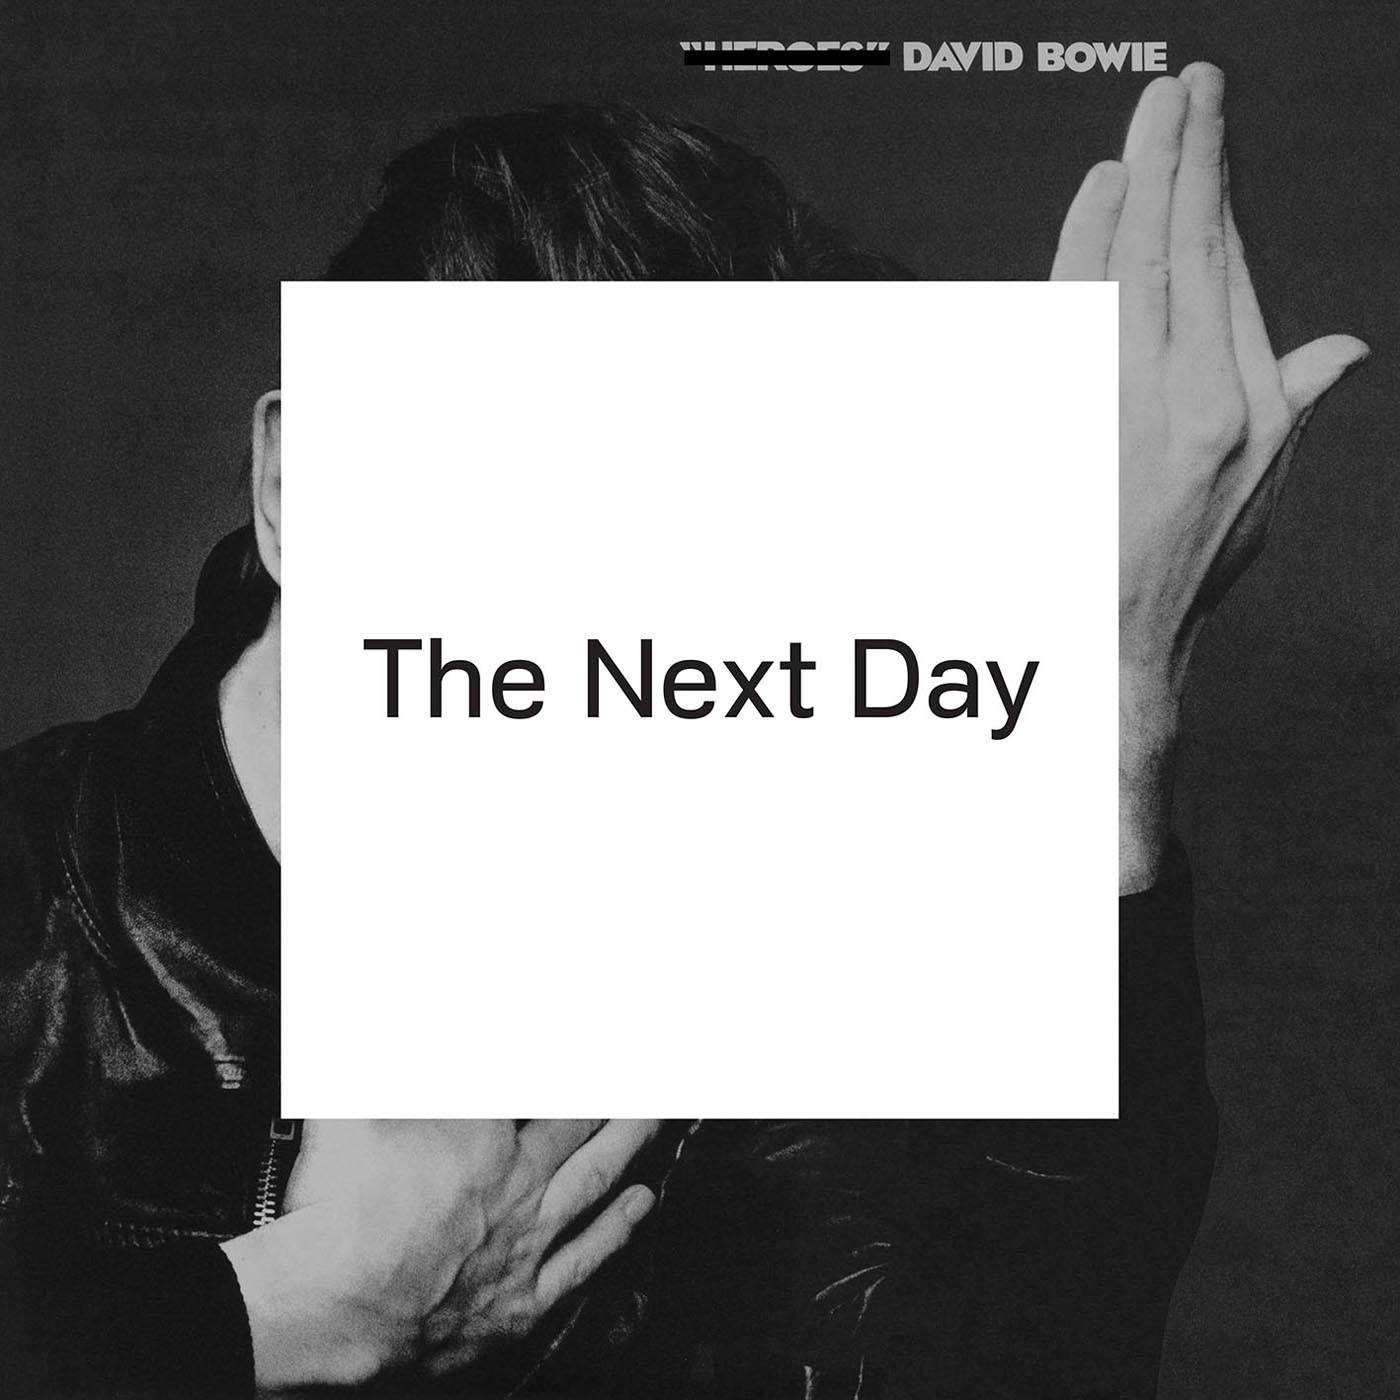 David Bowie - "The Next Day"